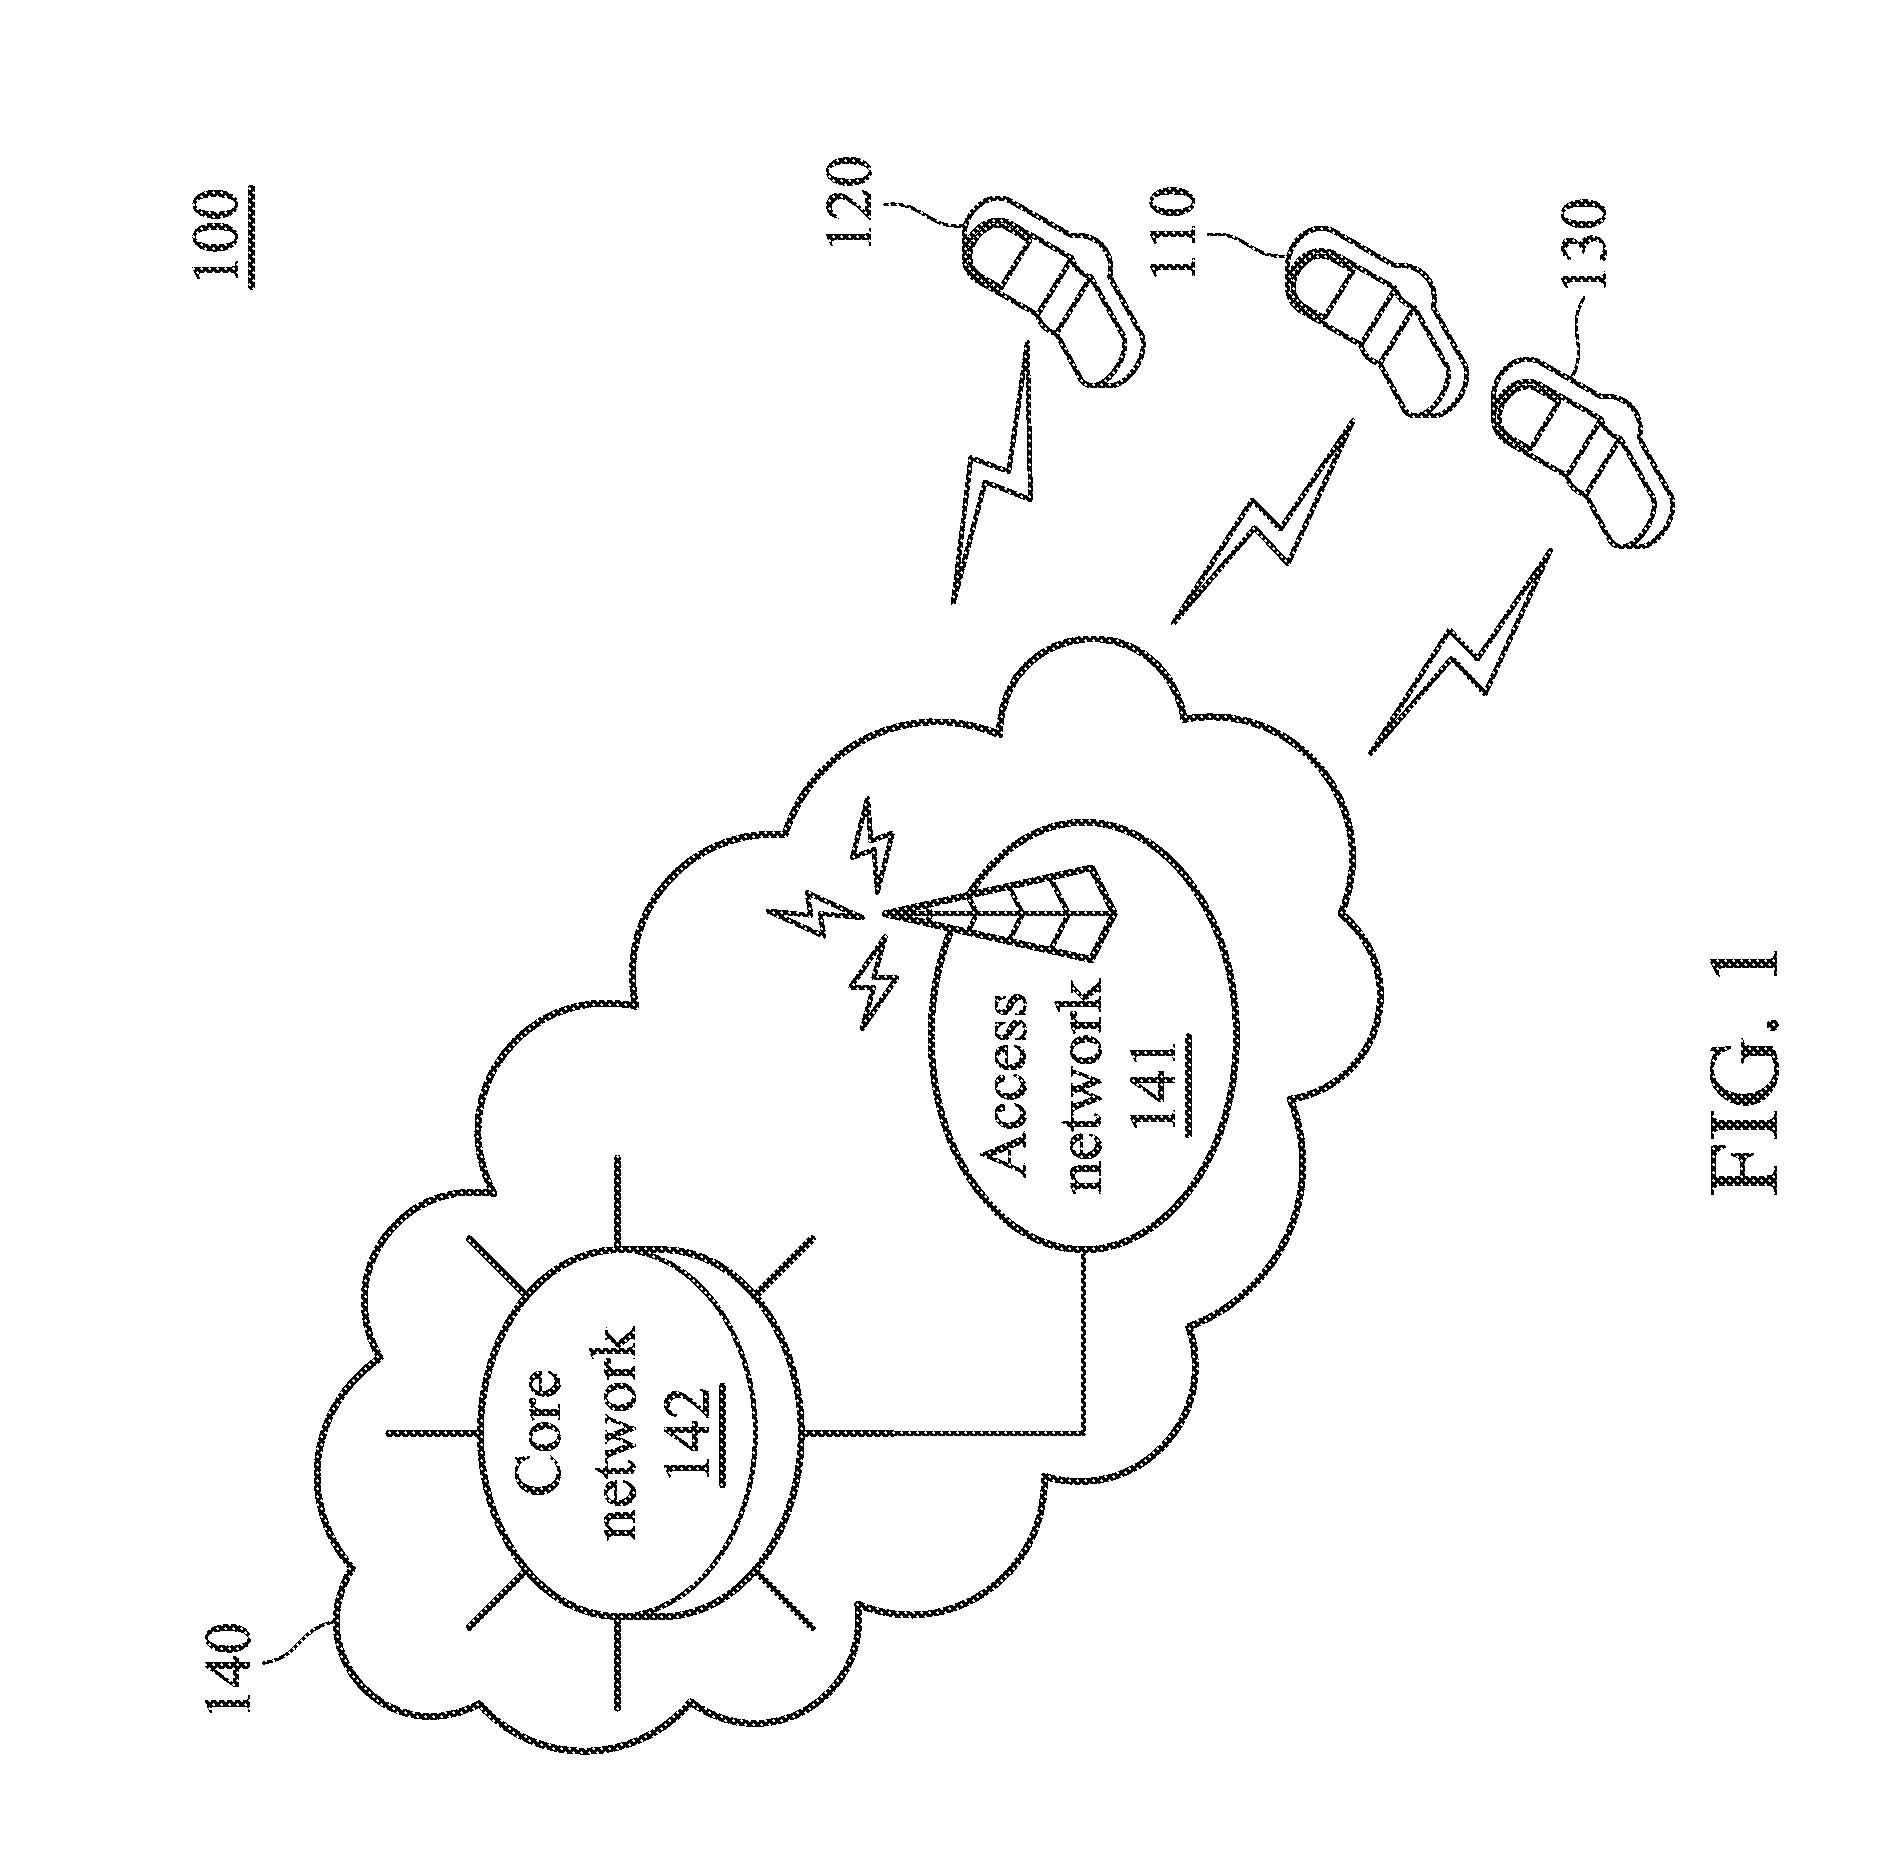 Cellular stations and methods for warning status reporting